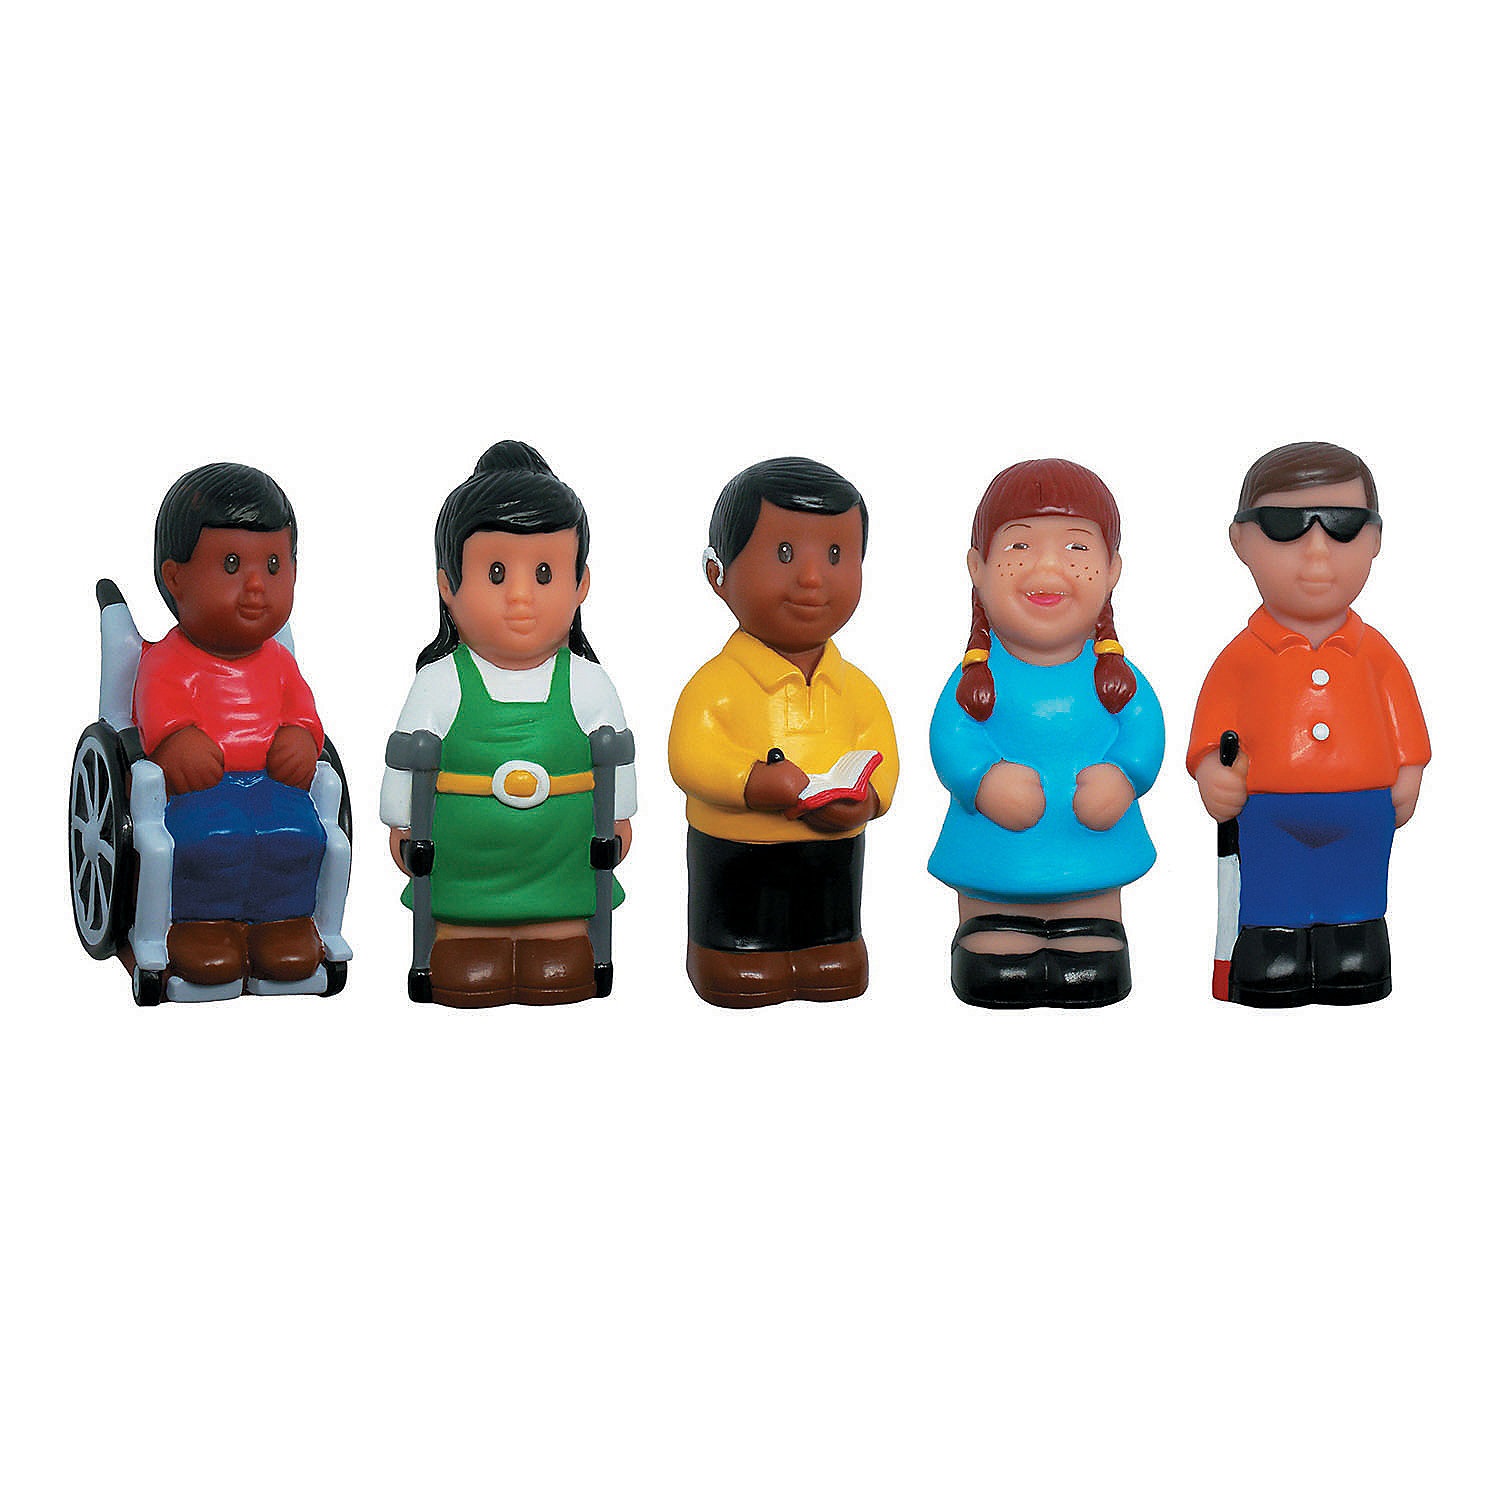 get-ready-kids-friends-with-disabilities-play-figures-set-of-5_13844679